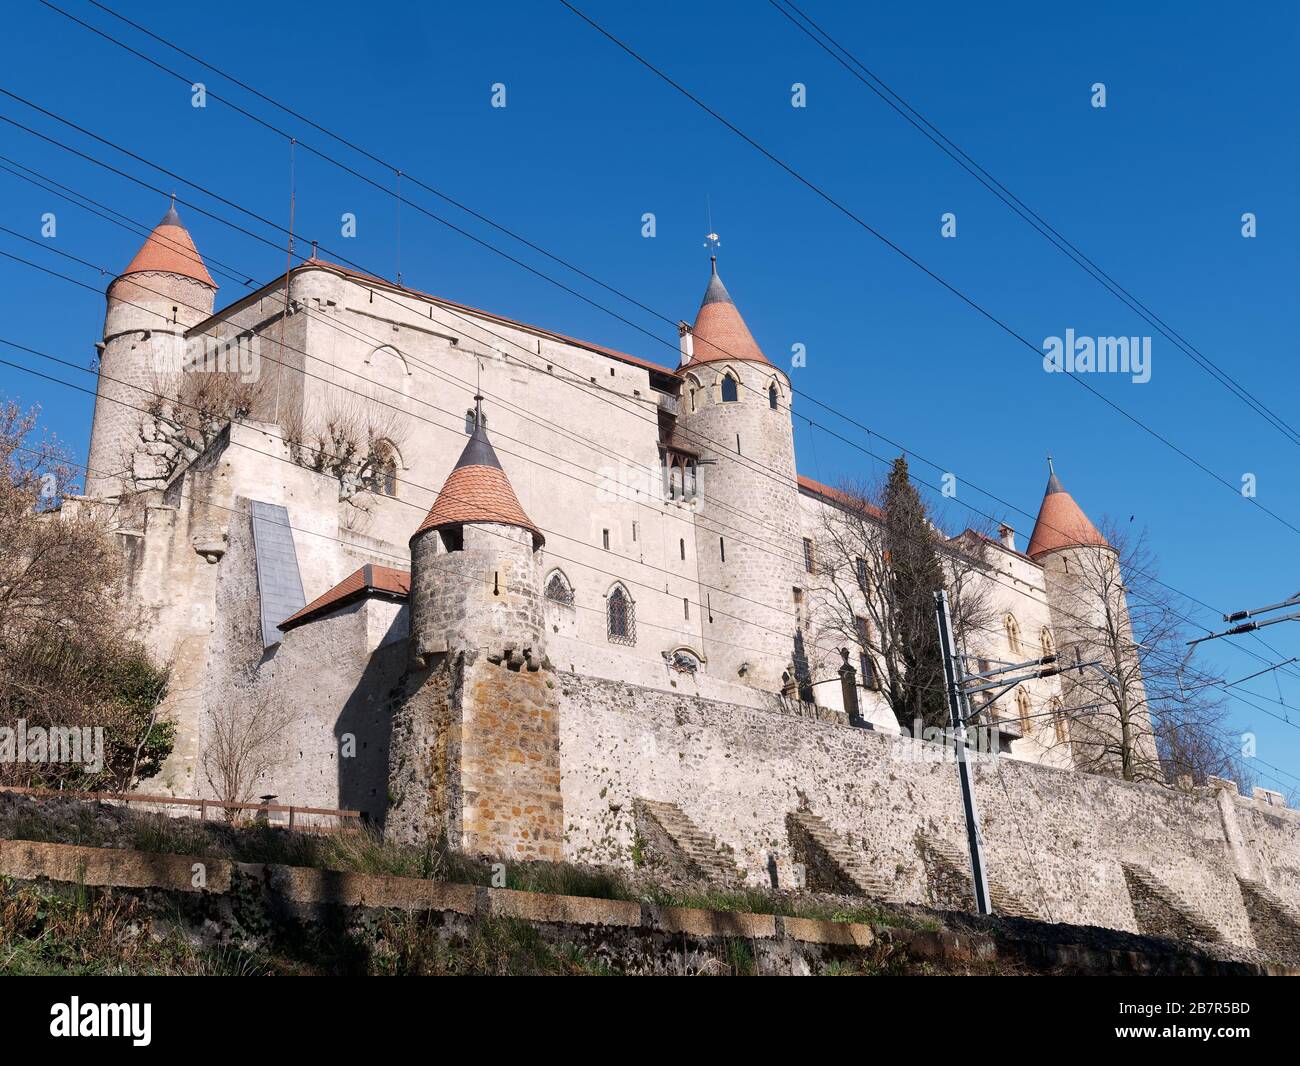 Back view of Grandson Castle, one of the best-preserved medieval fortresses in Switzerland against blue sky. Stock Photo